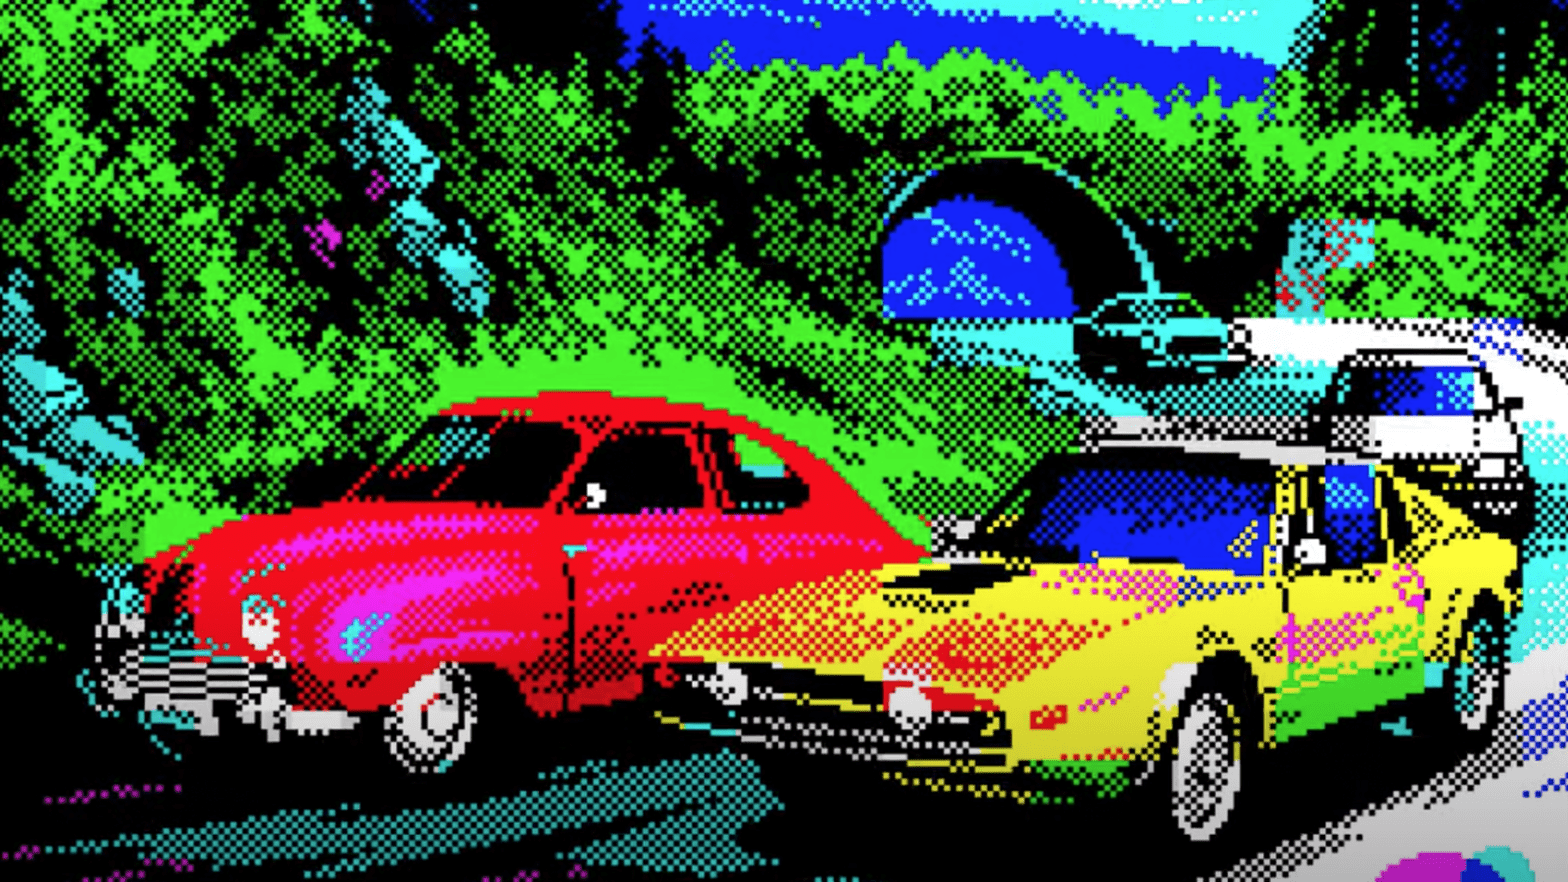 Please Enjoy This Driving Game For A Very Obsolete 8-Bit Computer